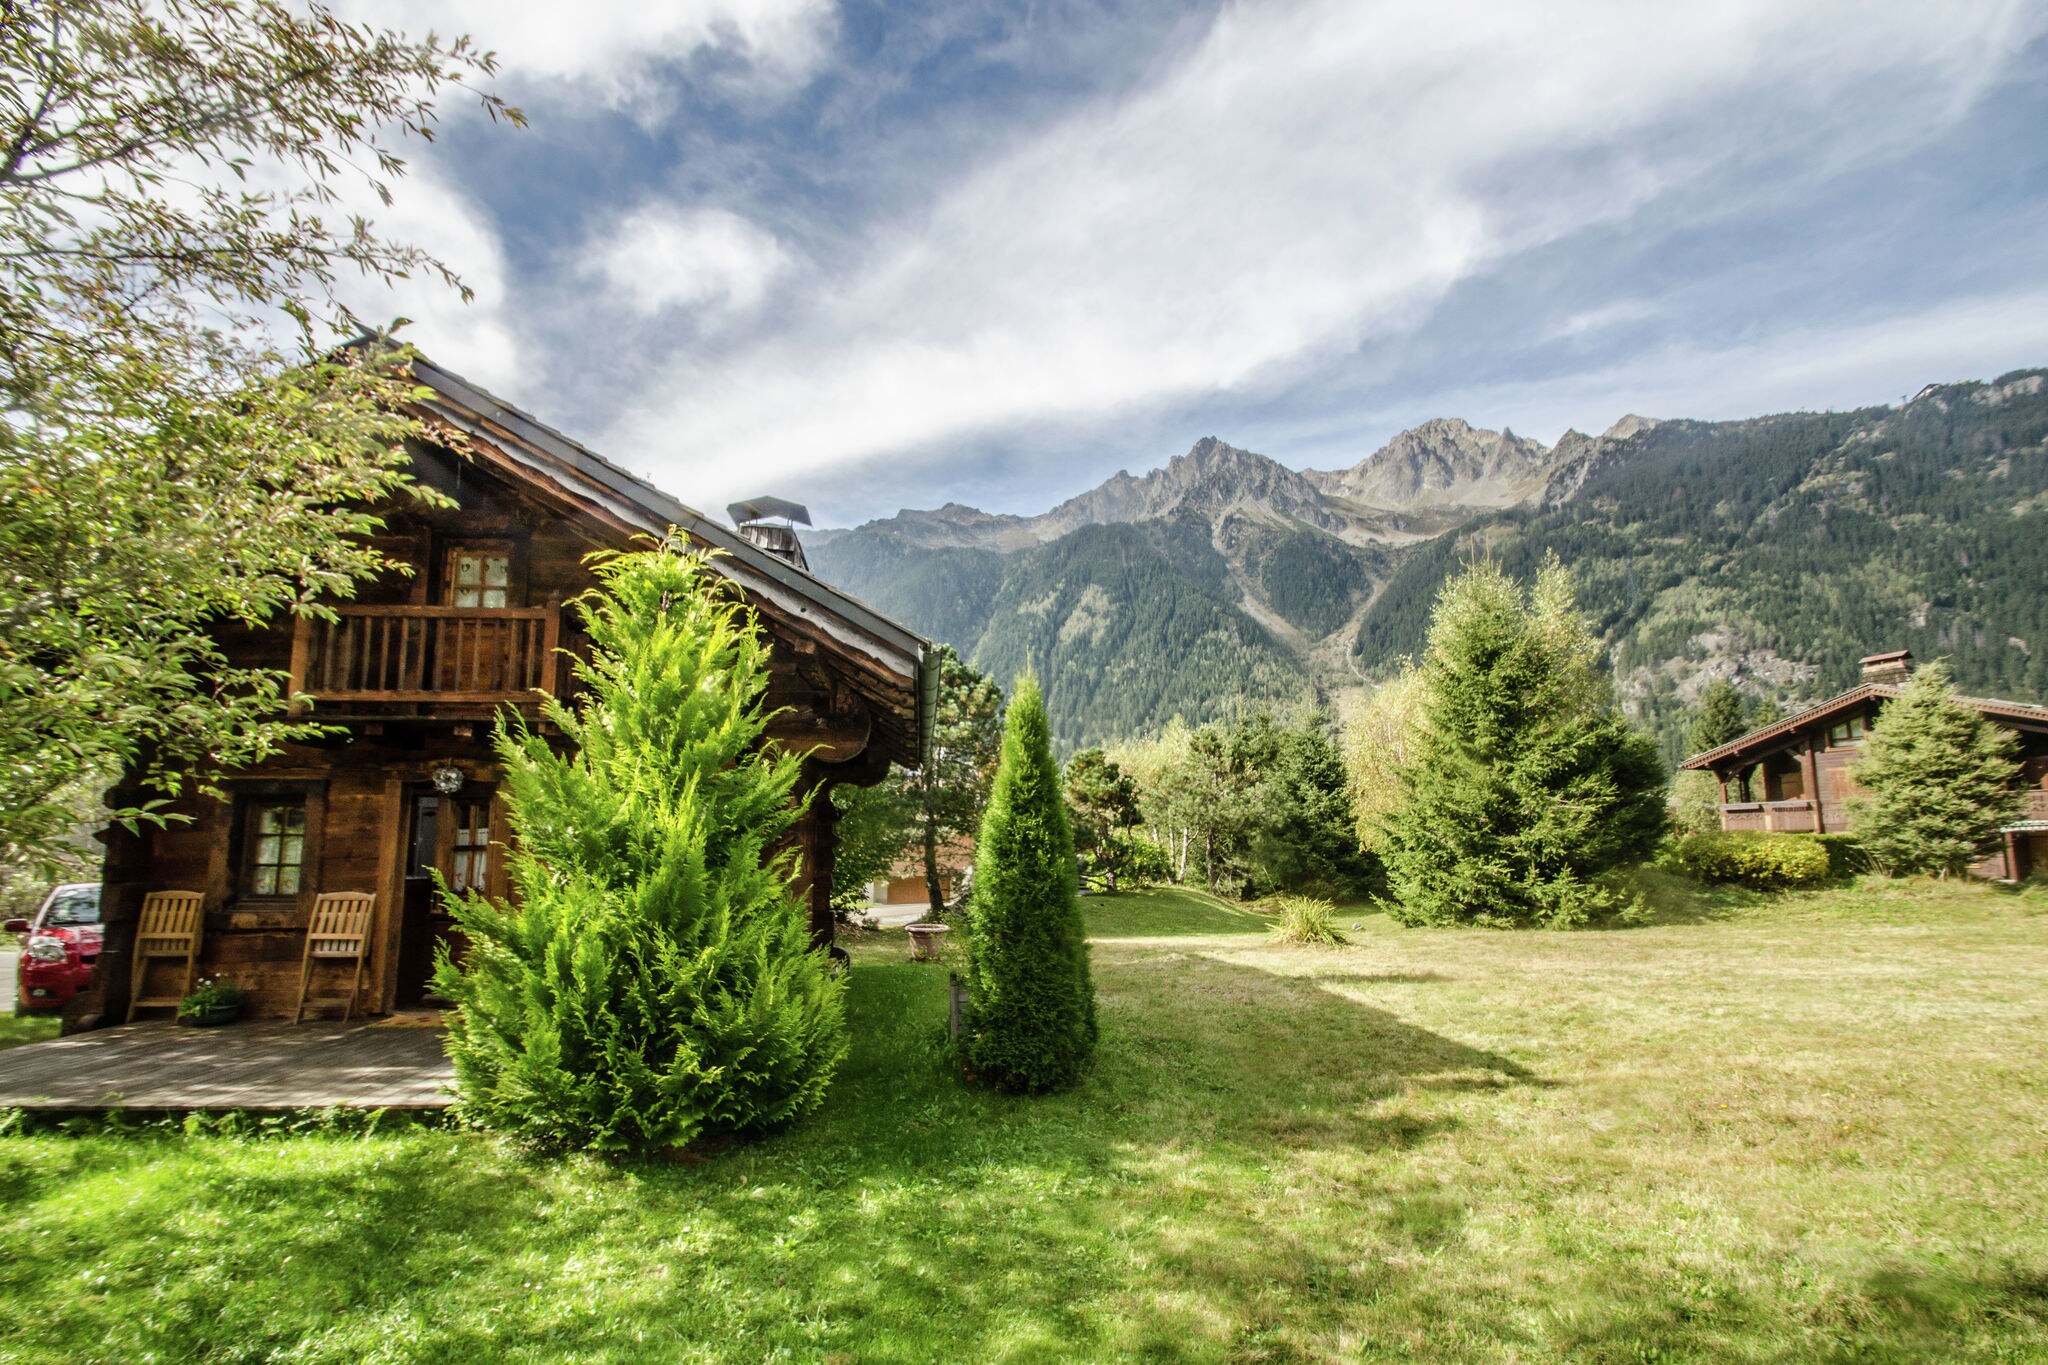 Quaint Chalet in Chamonix with Valley nearby